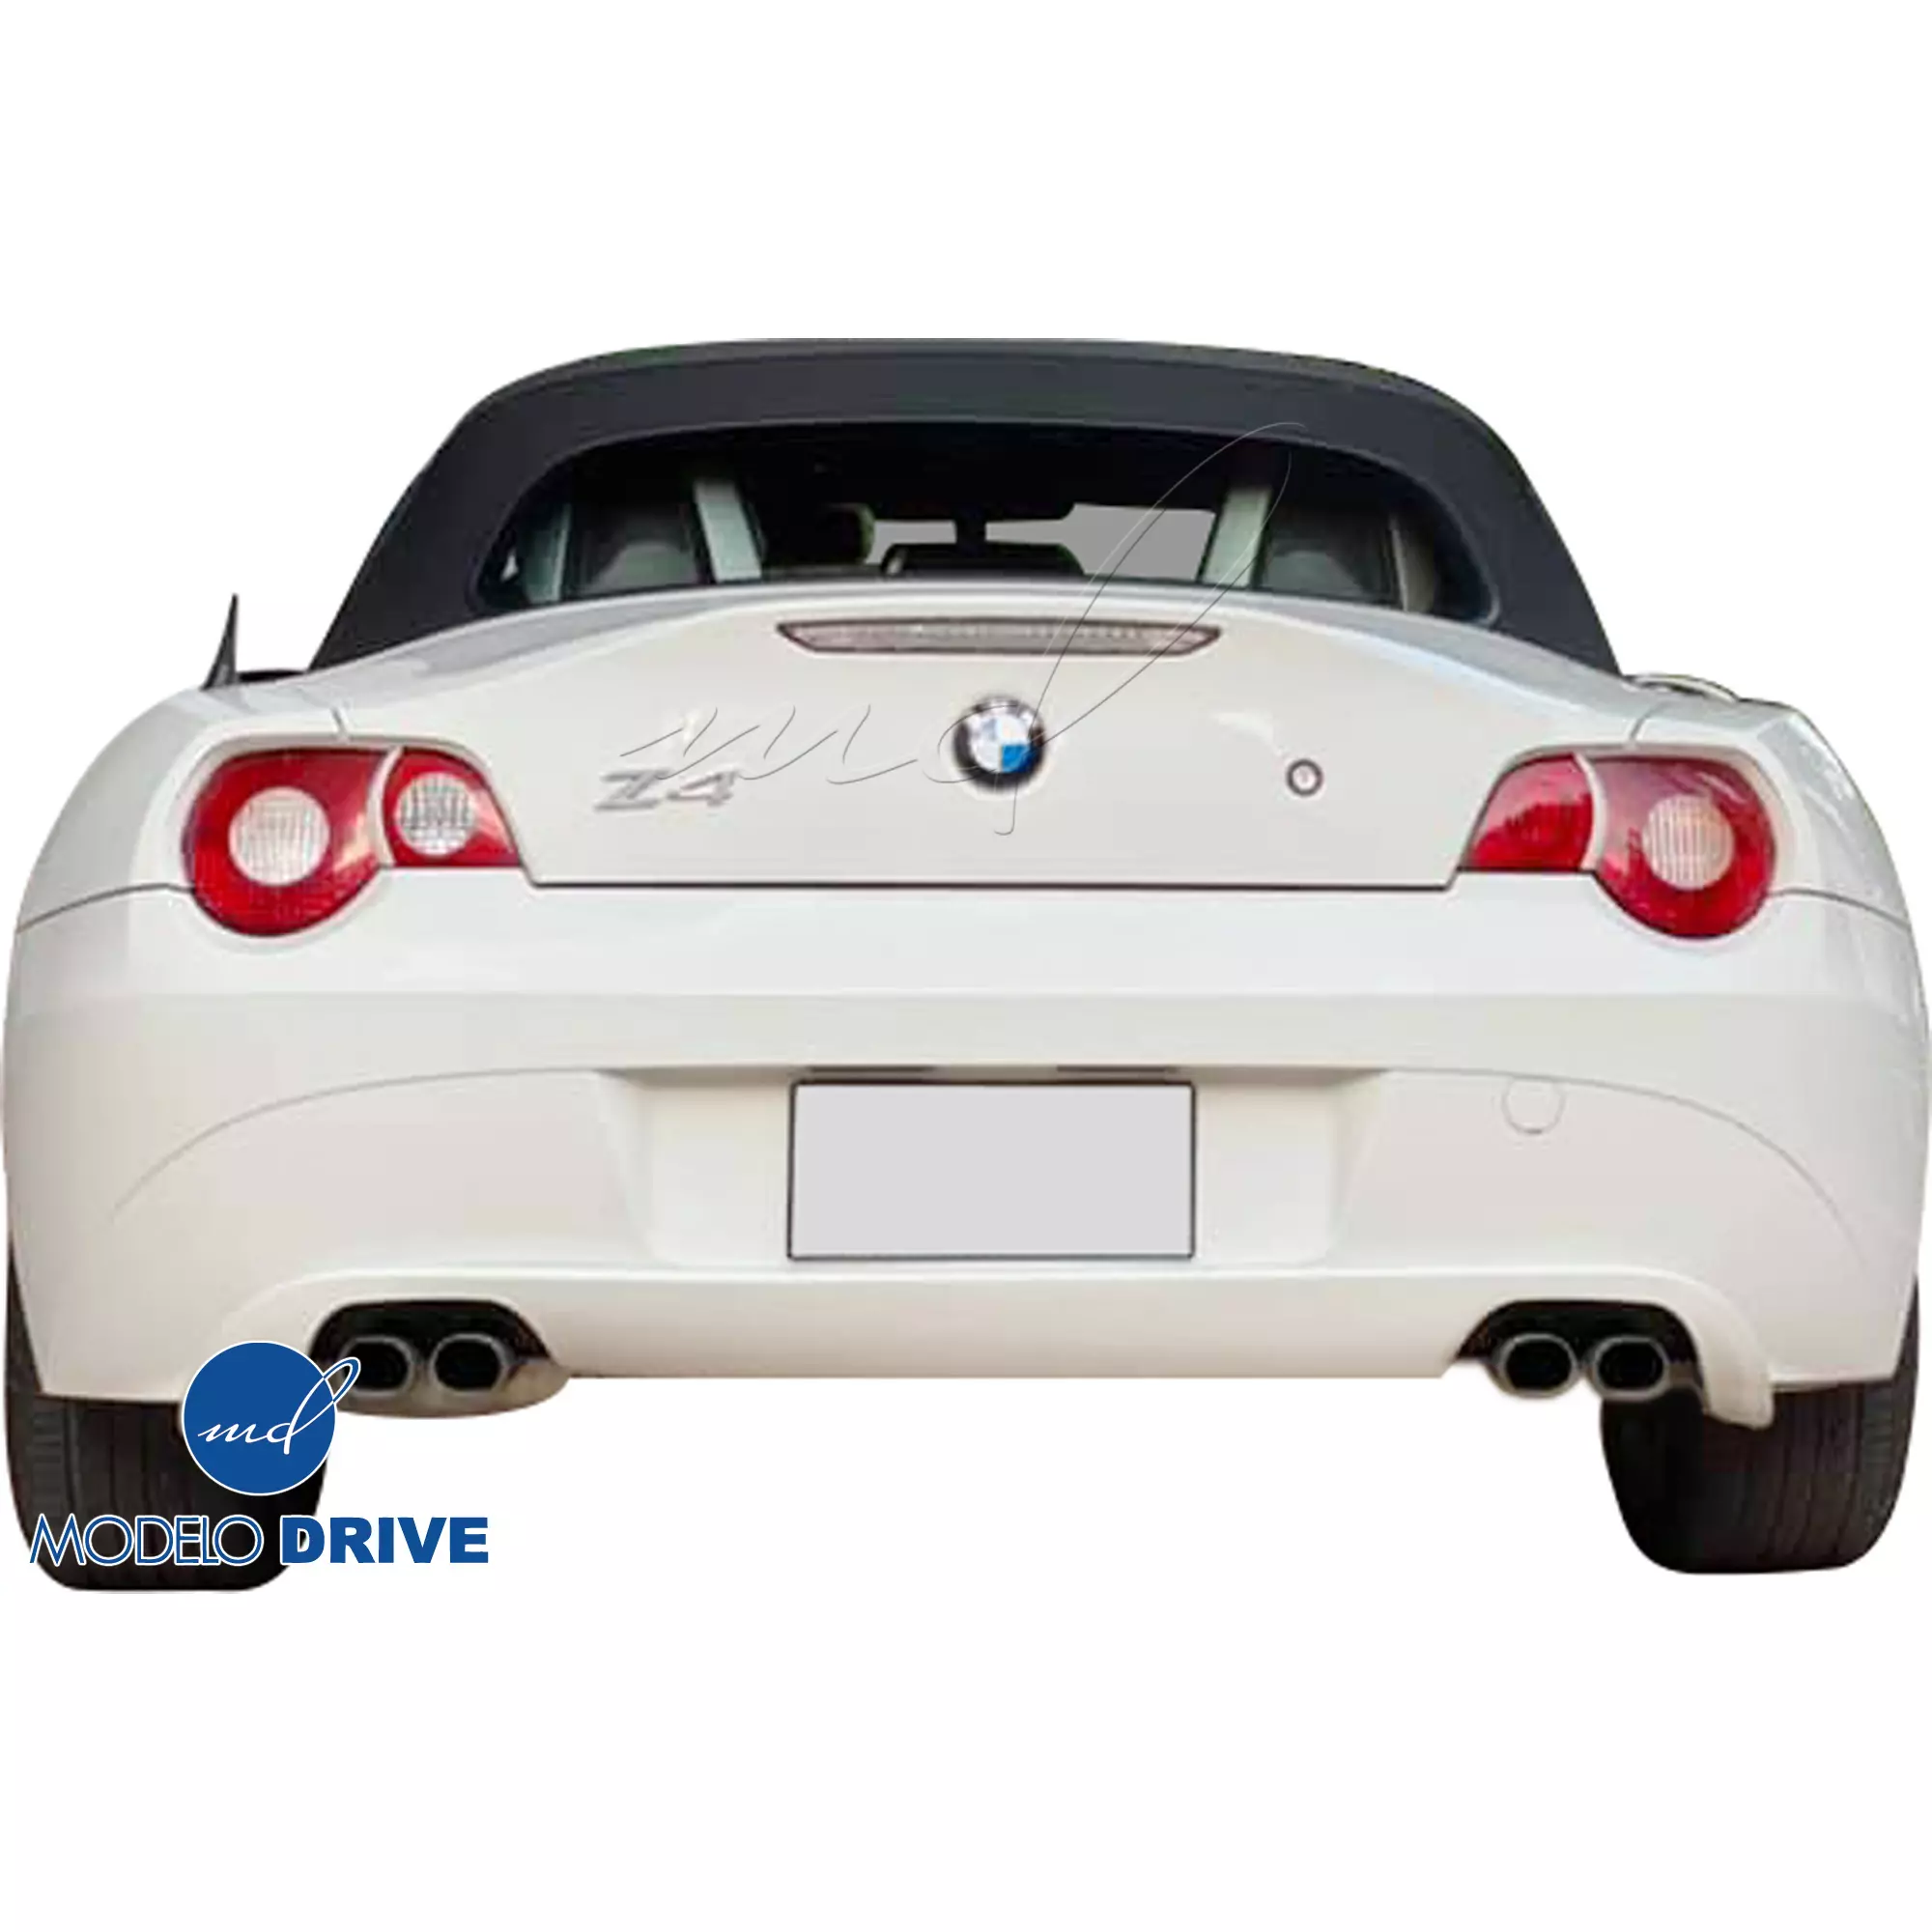 ModeloDrive FRP AERO Diffuser (dual exhst cut outs) > BMW Z4 E85 2003-2005 - Image 2